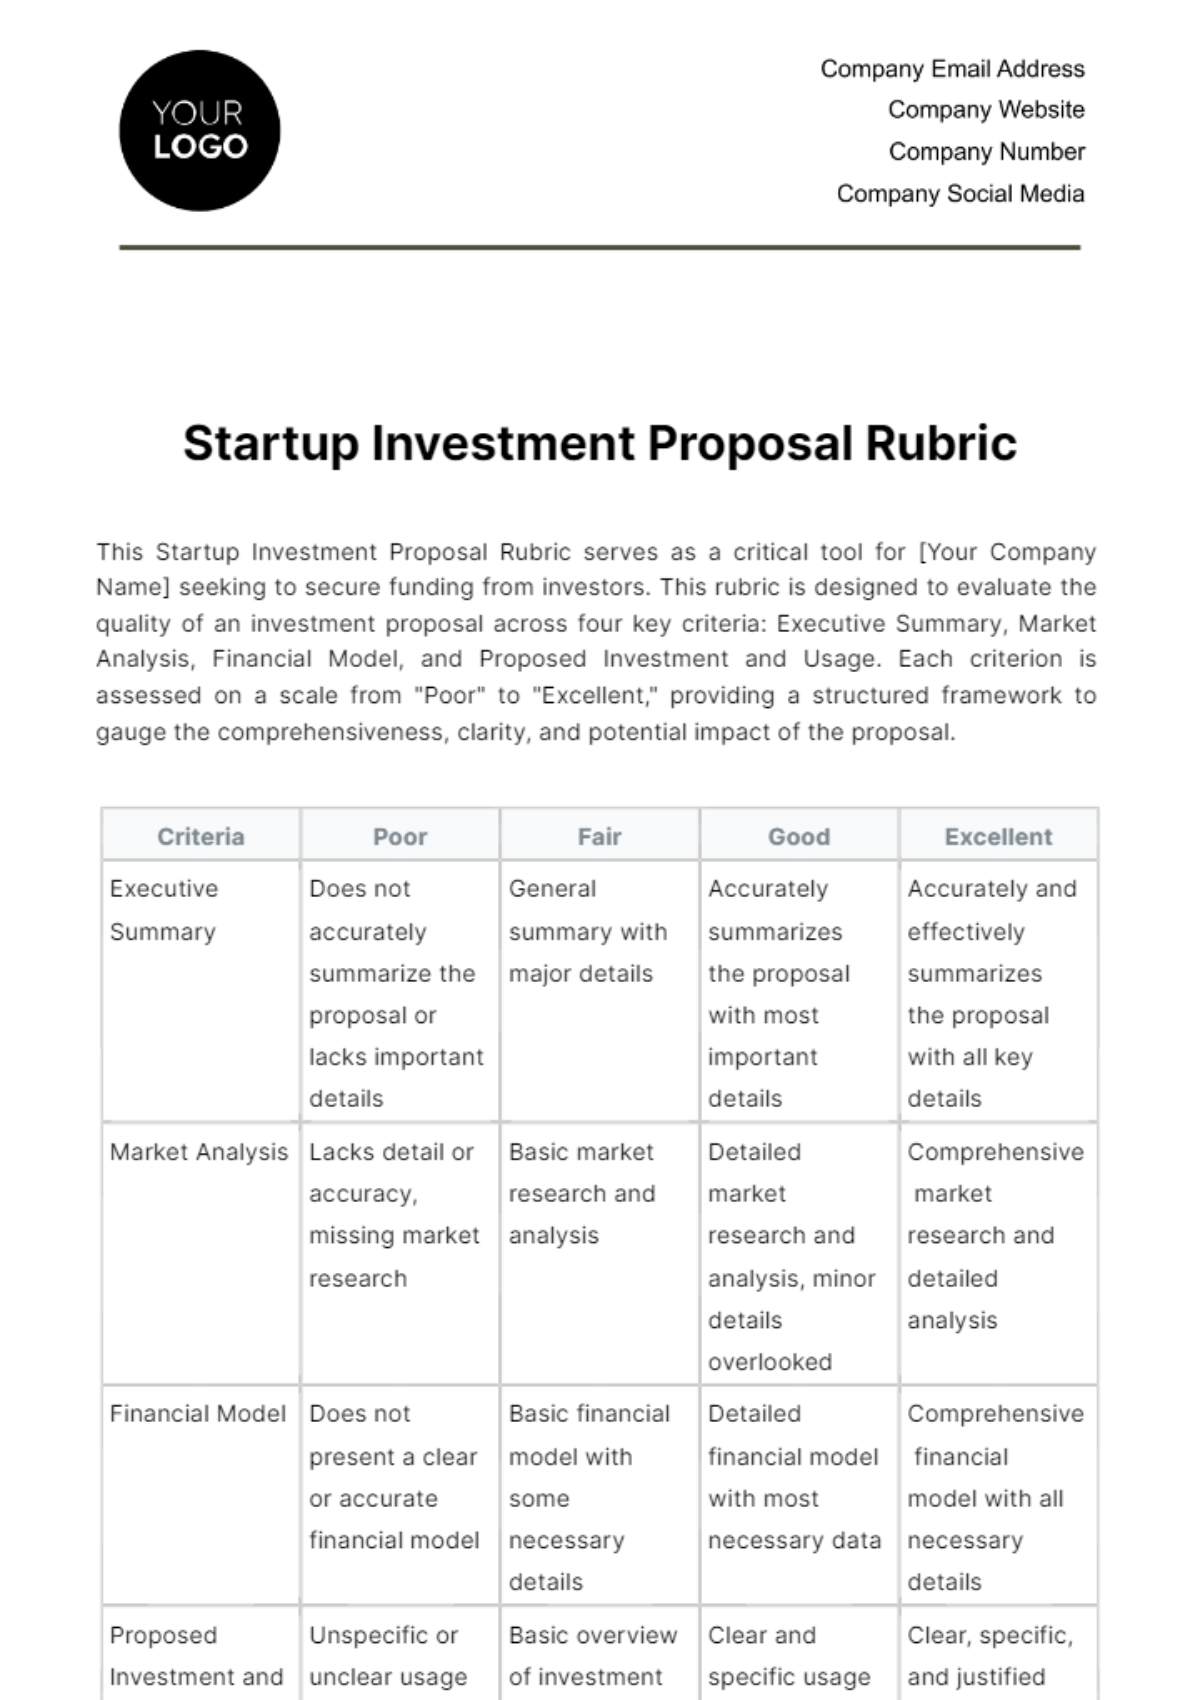 Free Startup Investment Proposal Rubric Template